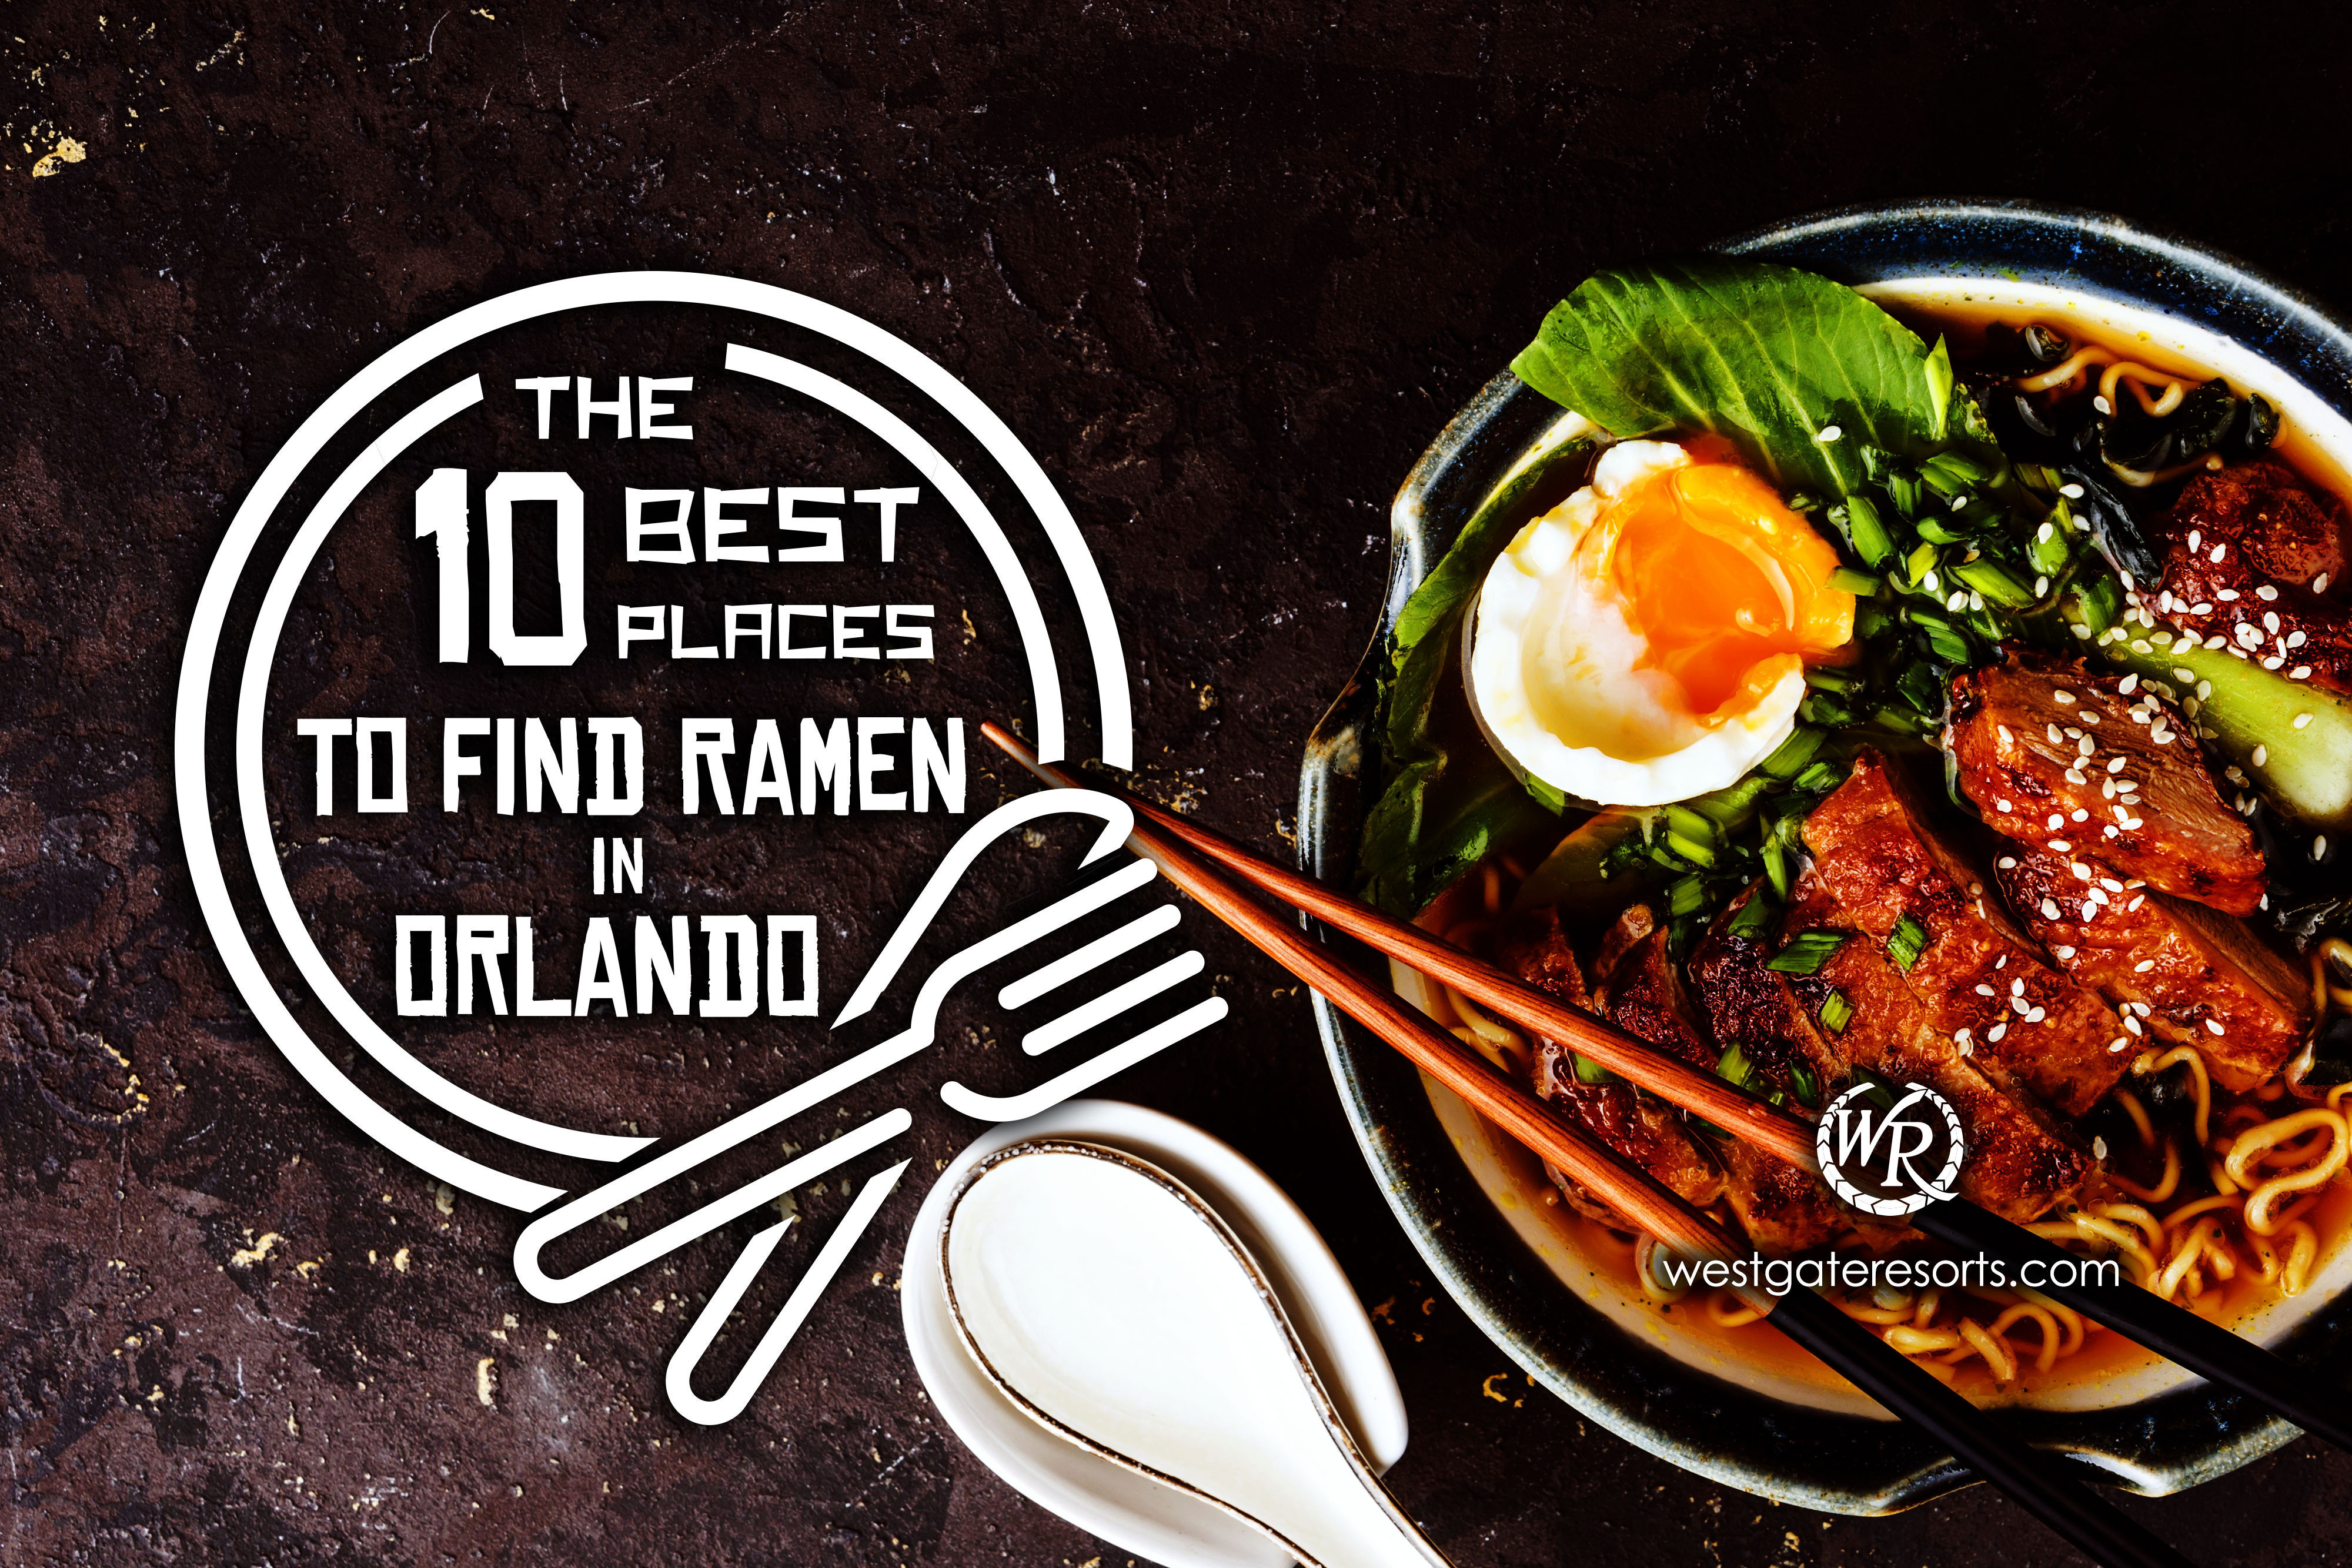 The 10 Best Places to Find Ramen Orlando Locals Can't Get Enough Of